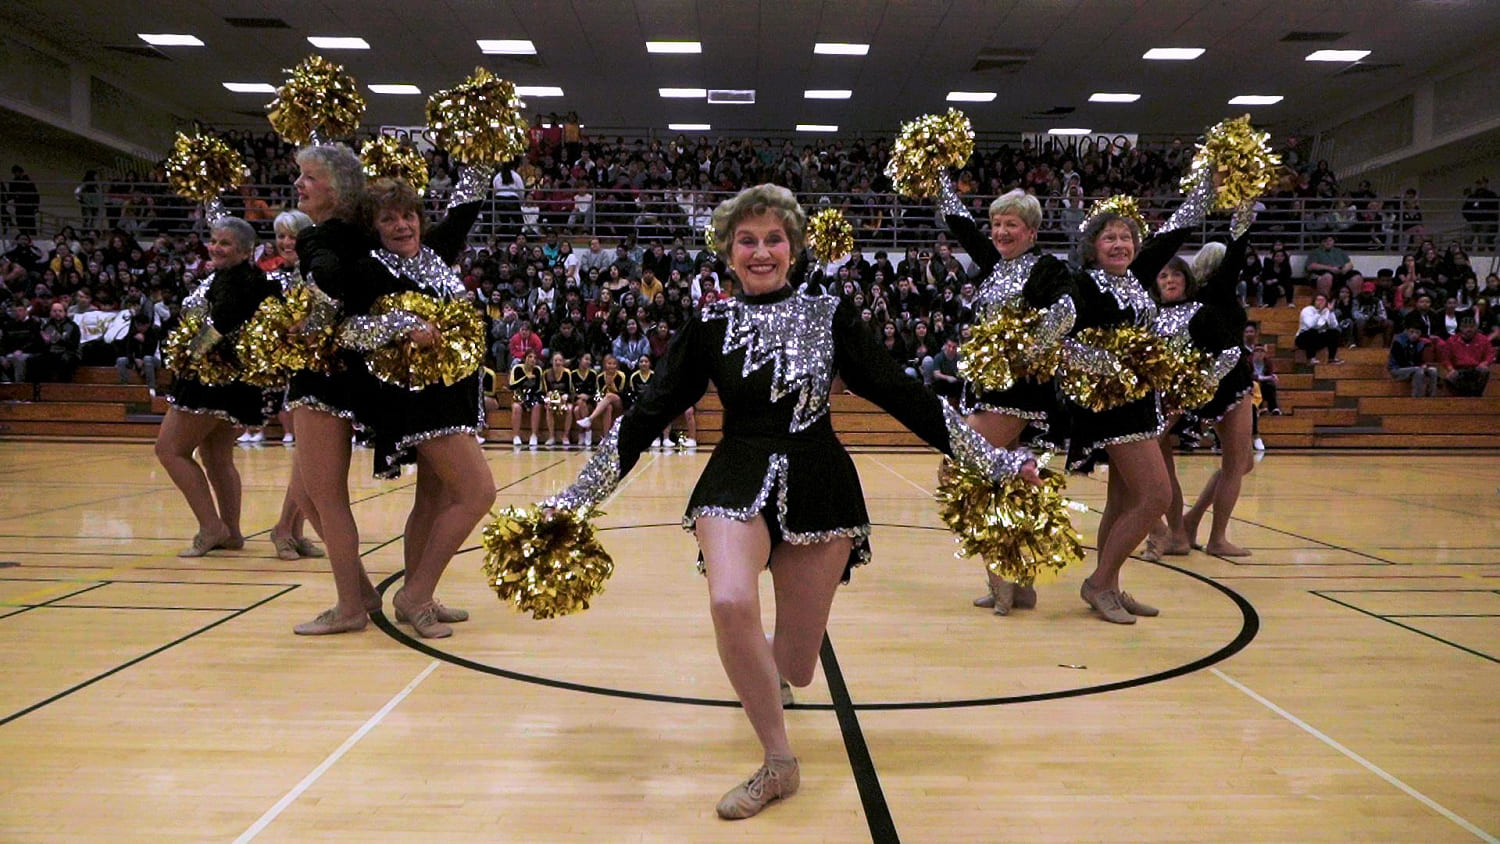 Meet the City Poms, the senior pom-pom squad that proves age is a number